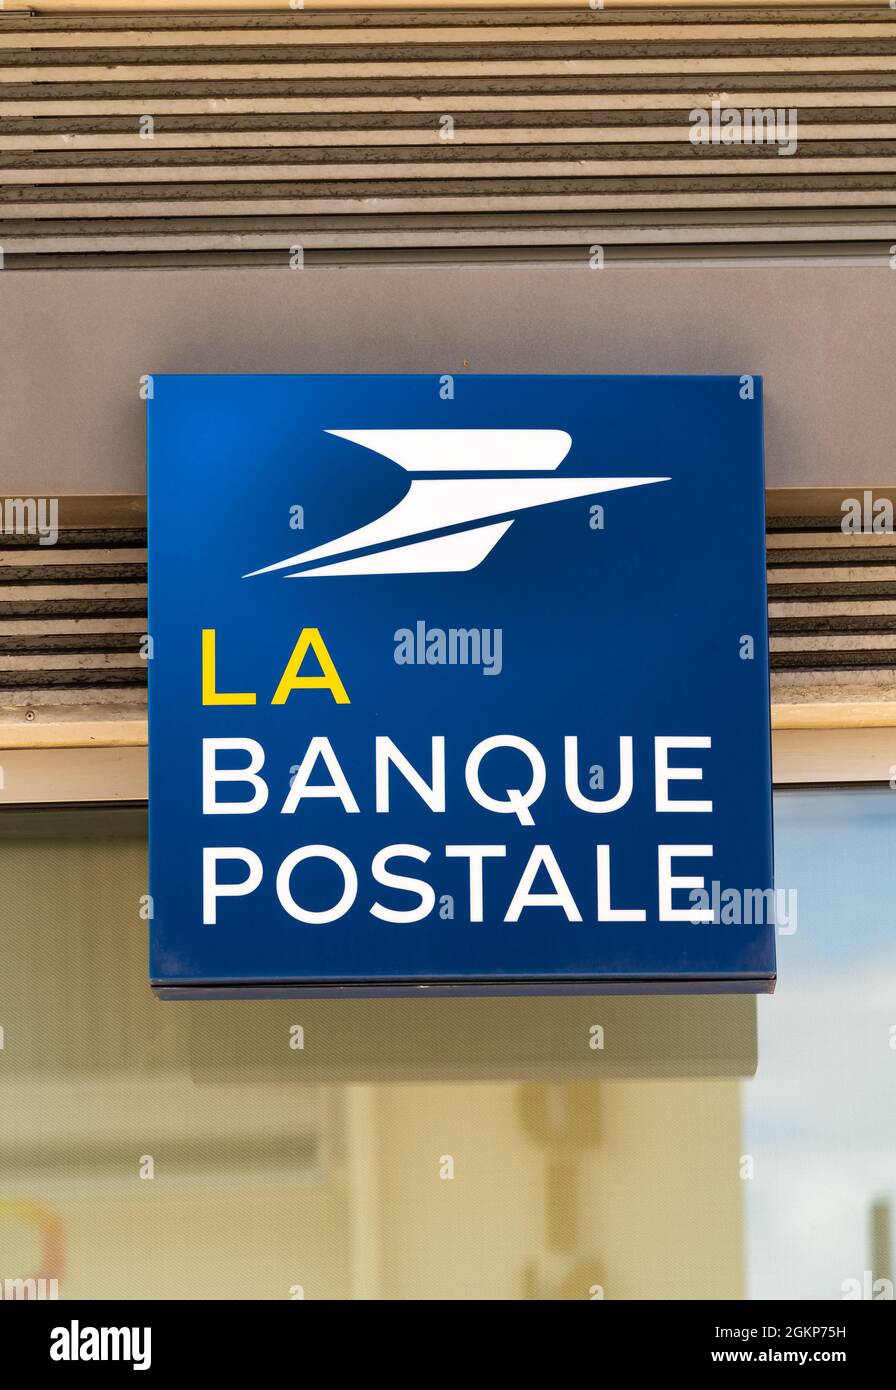 Le Havre, France - August 8, 2021: La Banque Postale is a French public bank founded on January 1, 2006, a 100% subsidiary of the La Poste group, from Stock Photo